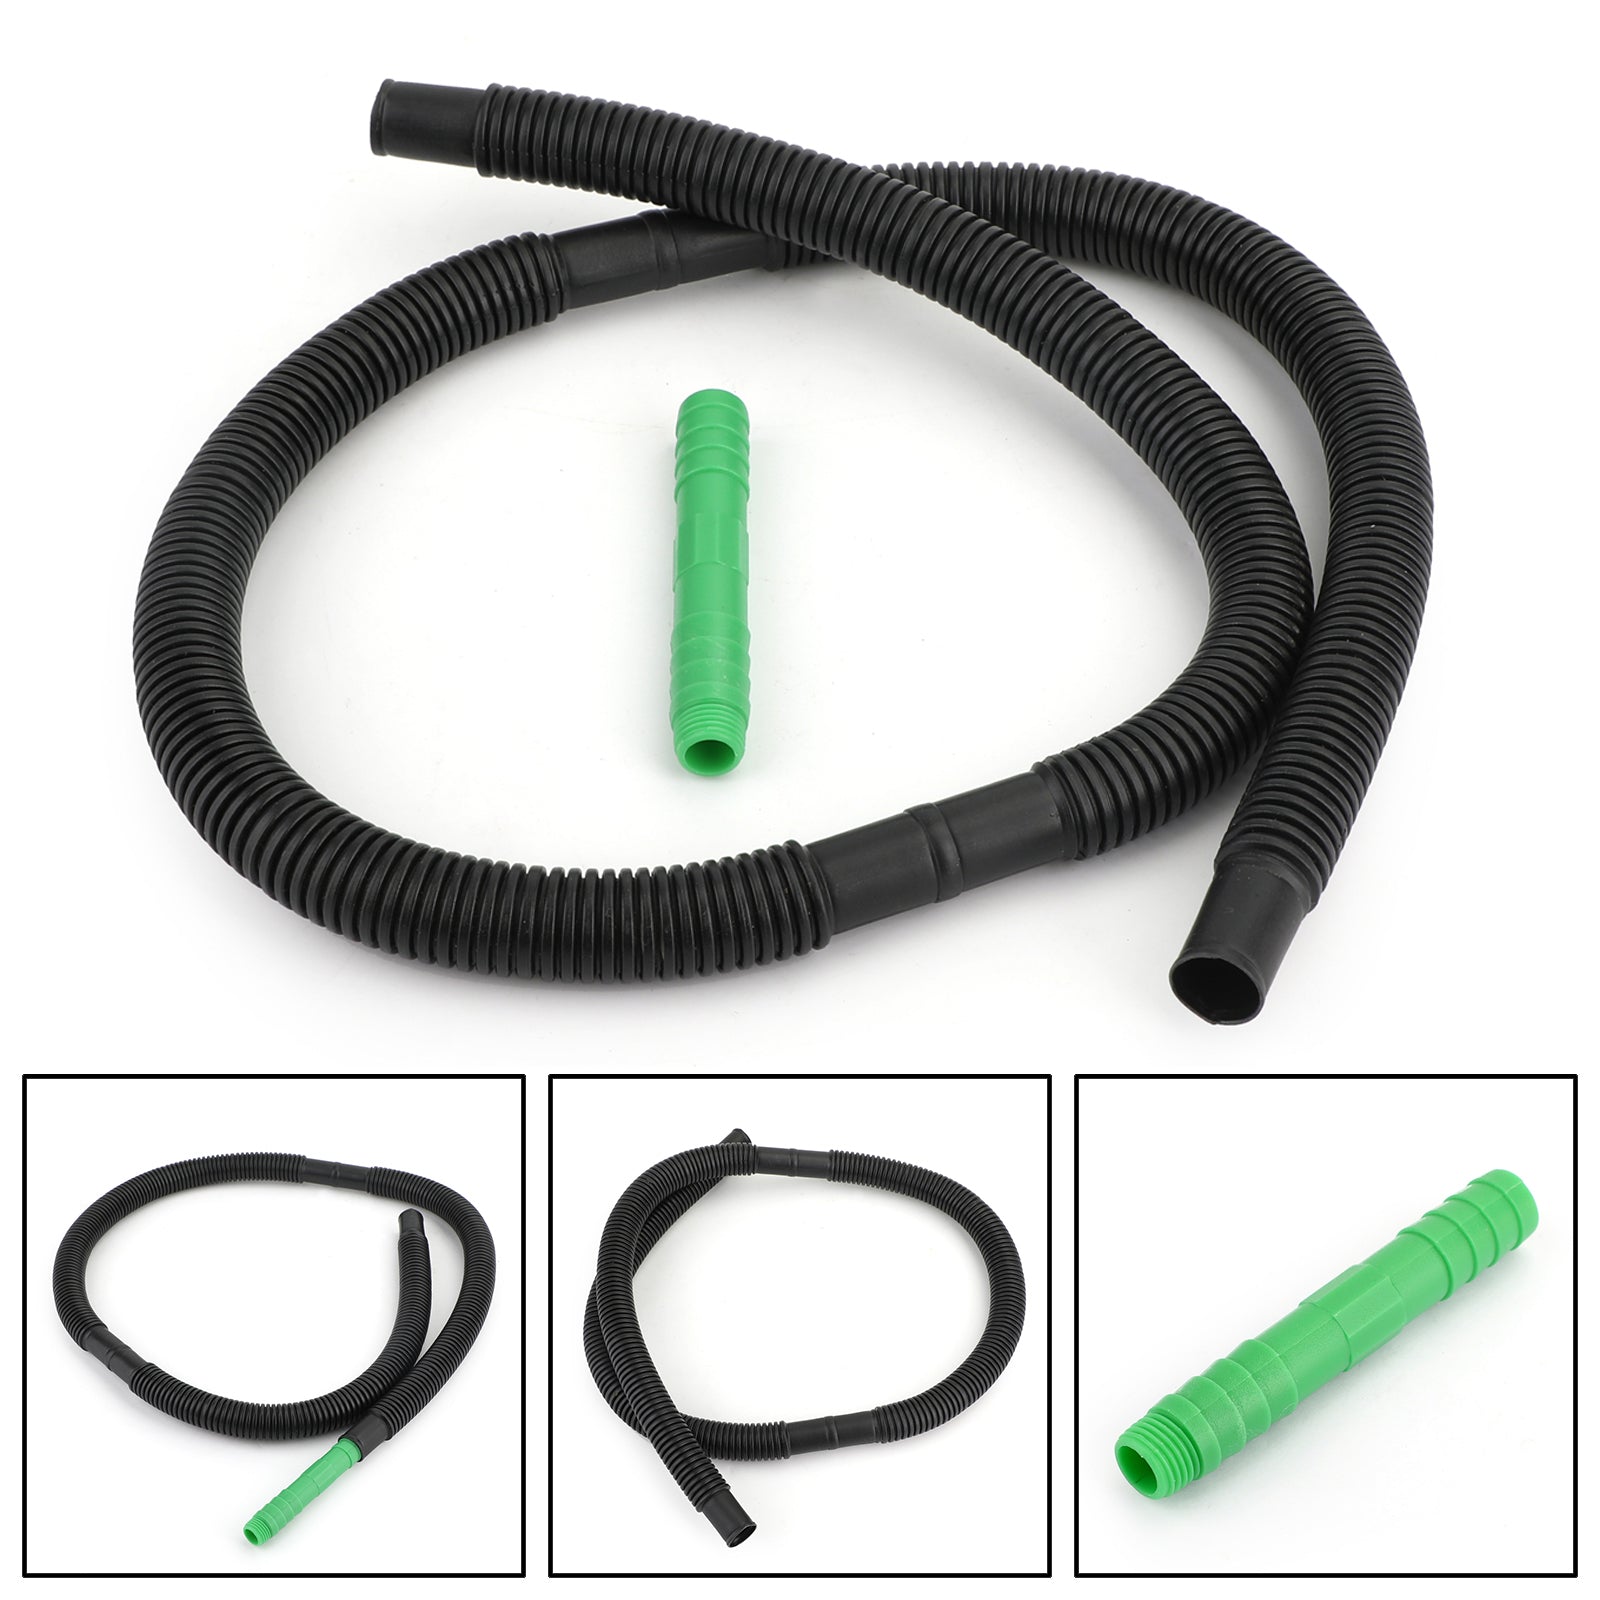 Yamaha Drain Kit Outboard Oil Change Hose Fit For Yamaha Outboard four stroke models 15hp-150hp produced 1994-present